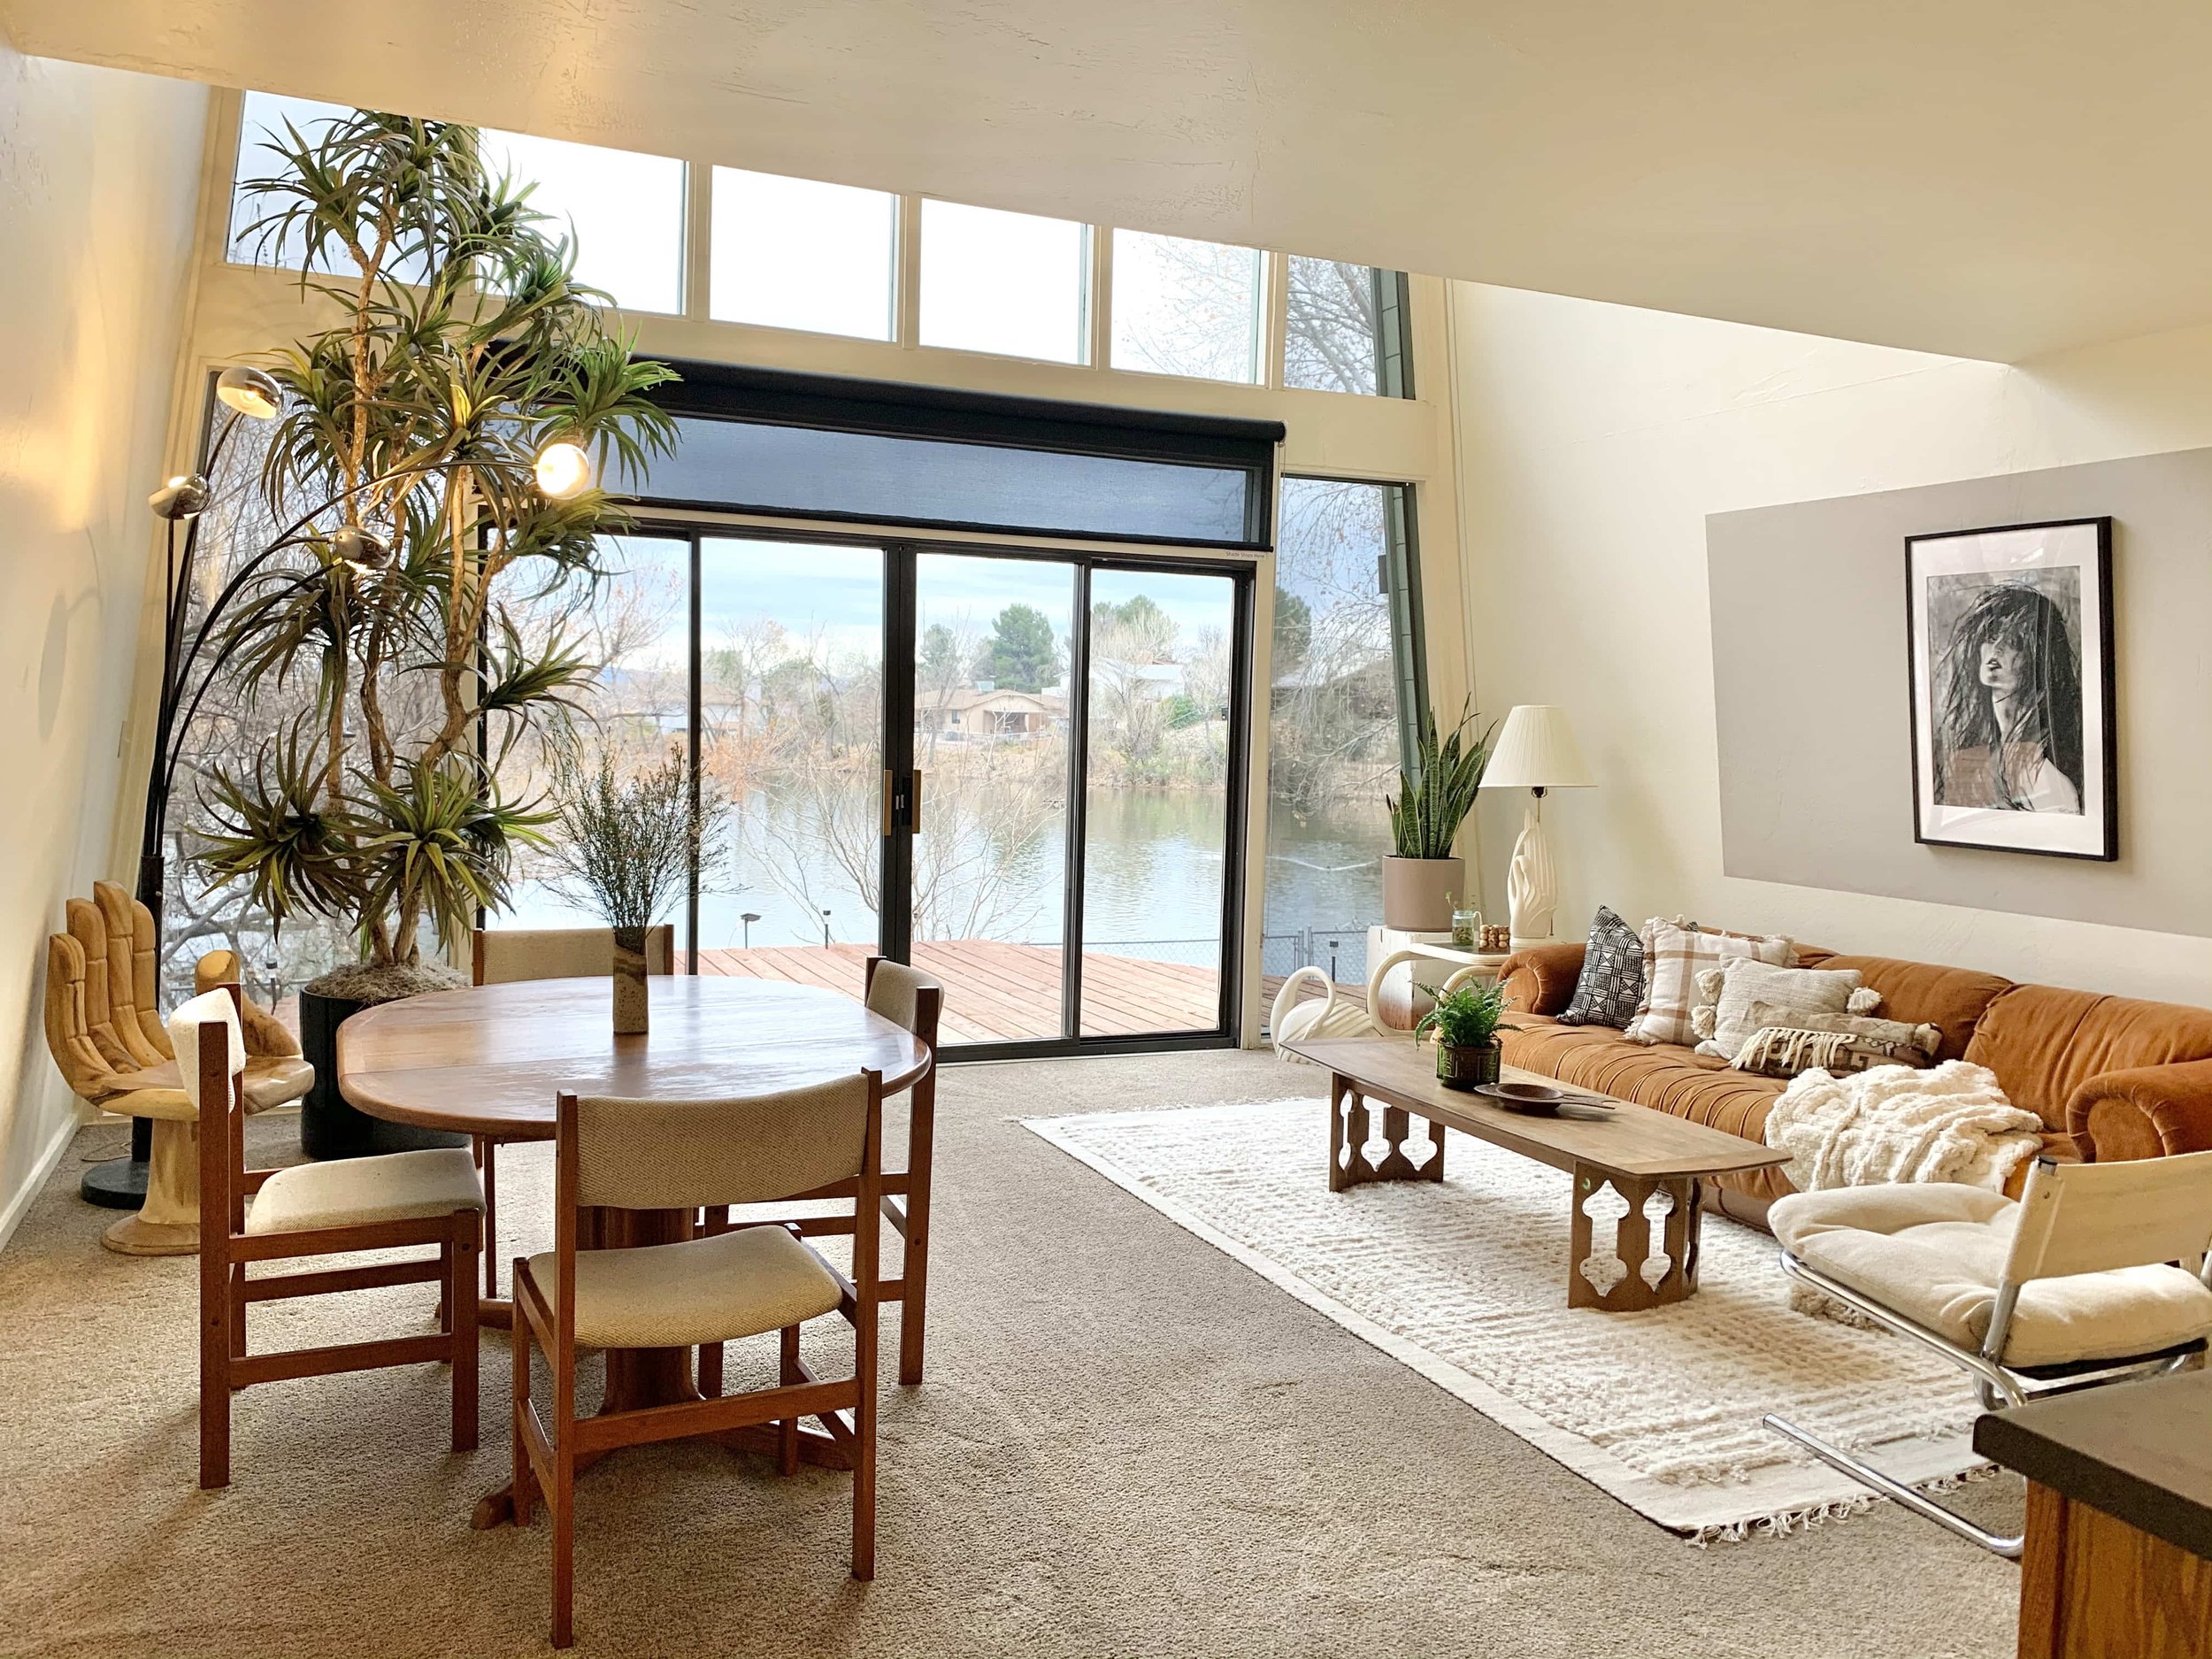 The inside of the duck pond reveals large windows and a beautifully curated living space